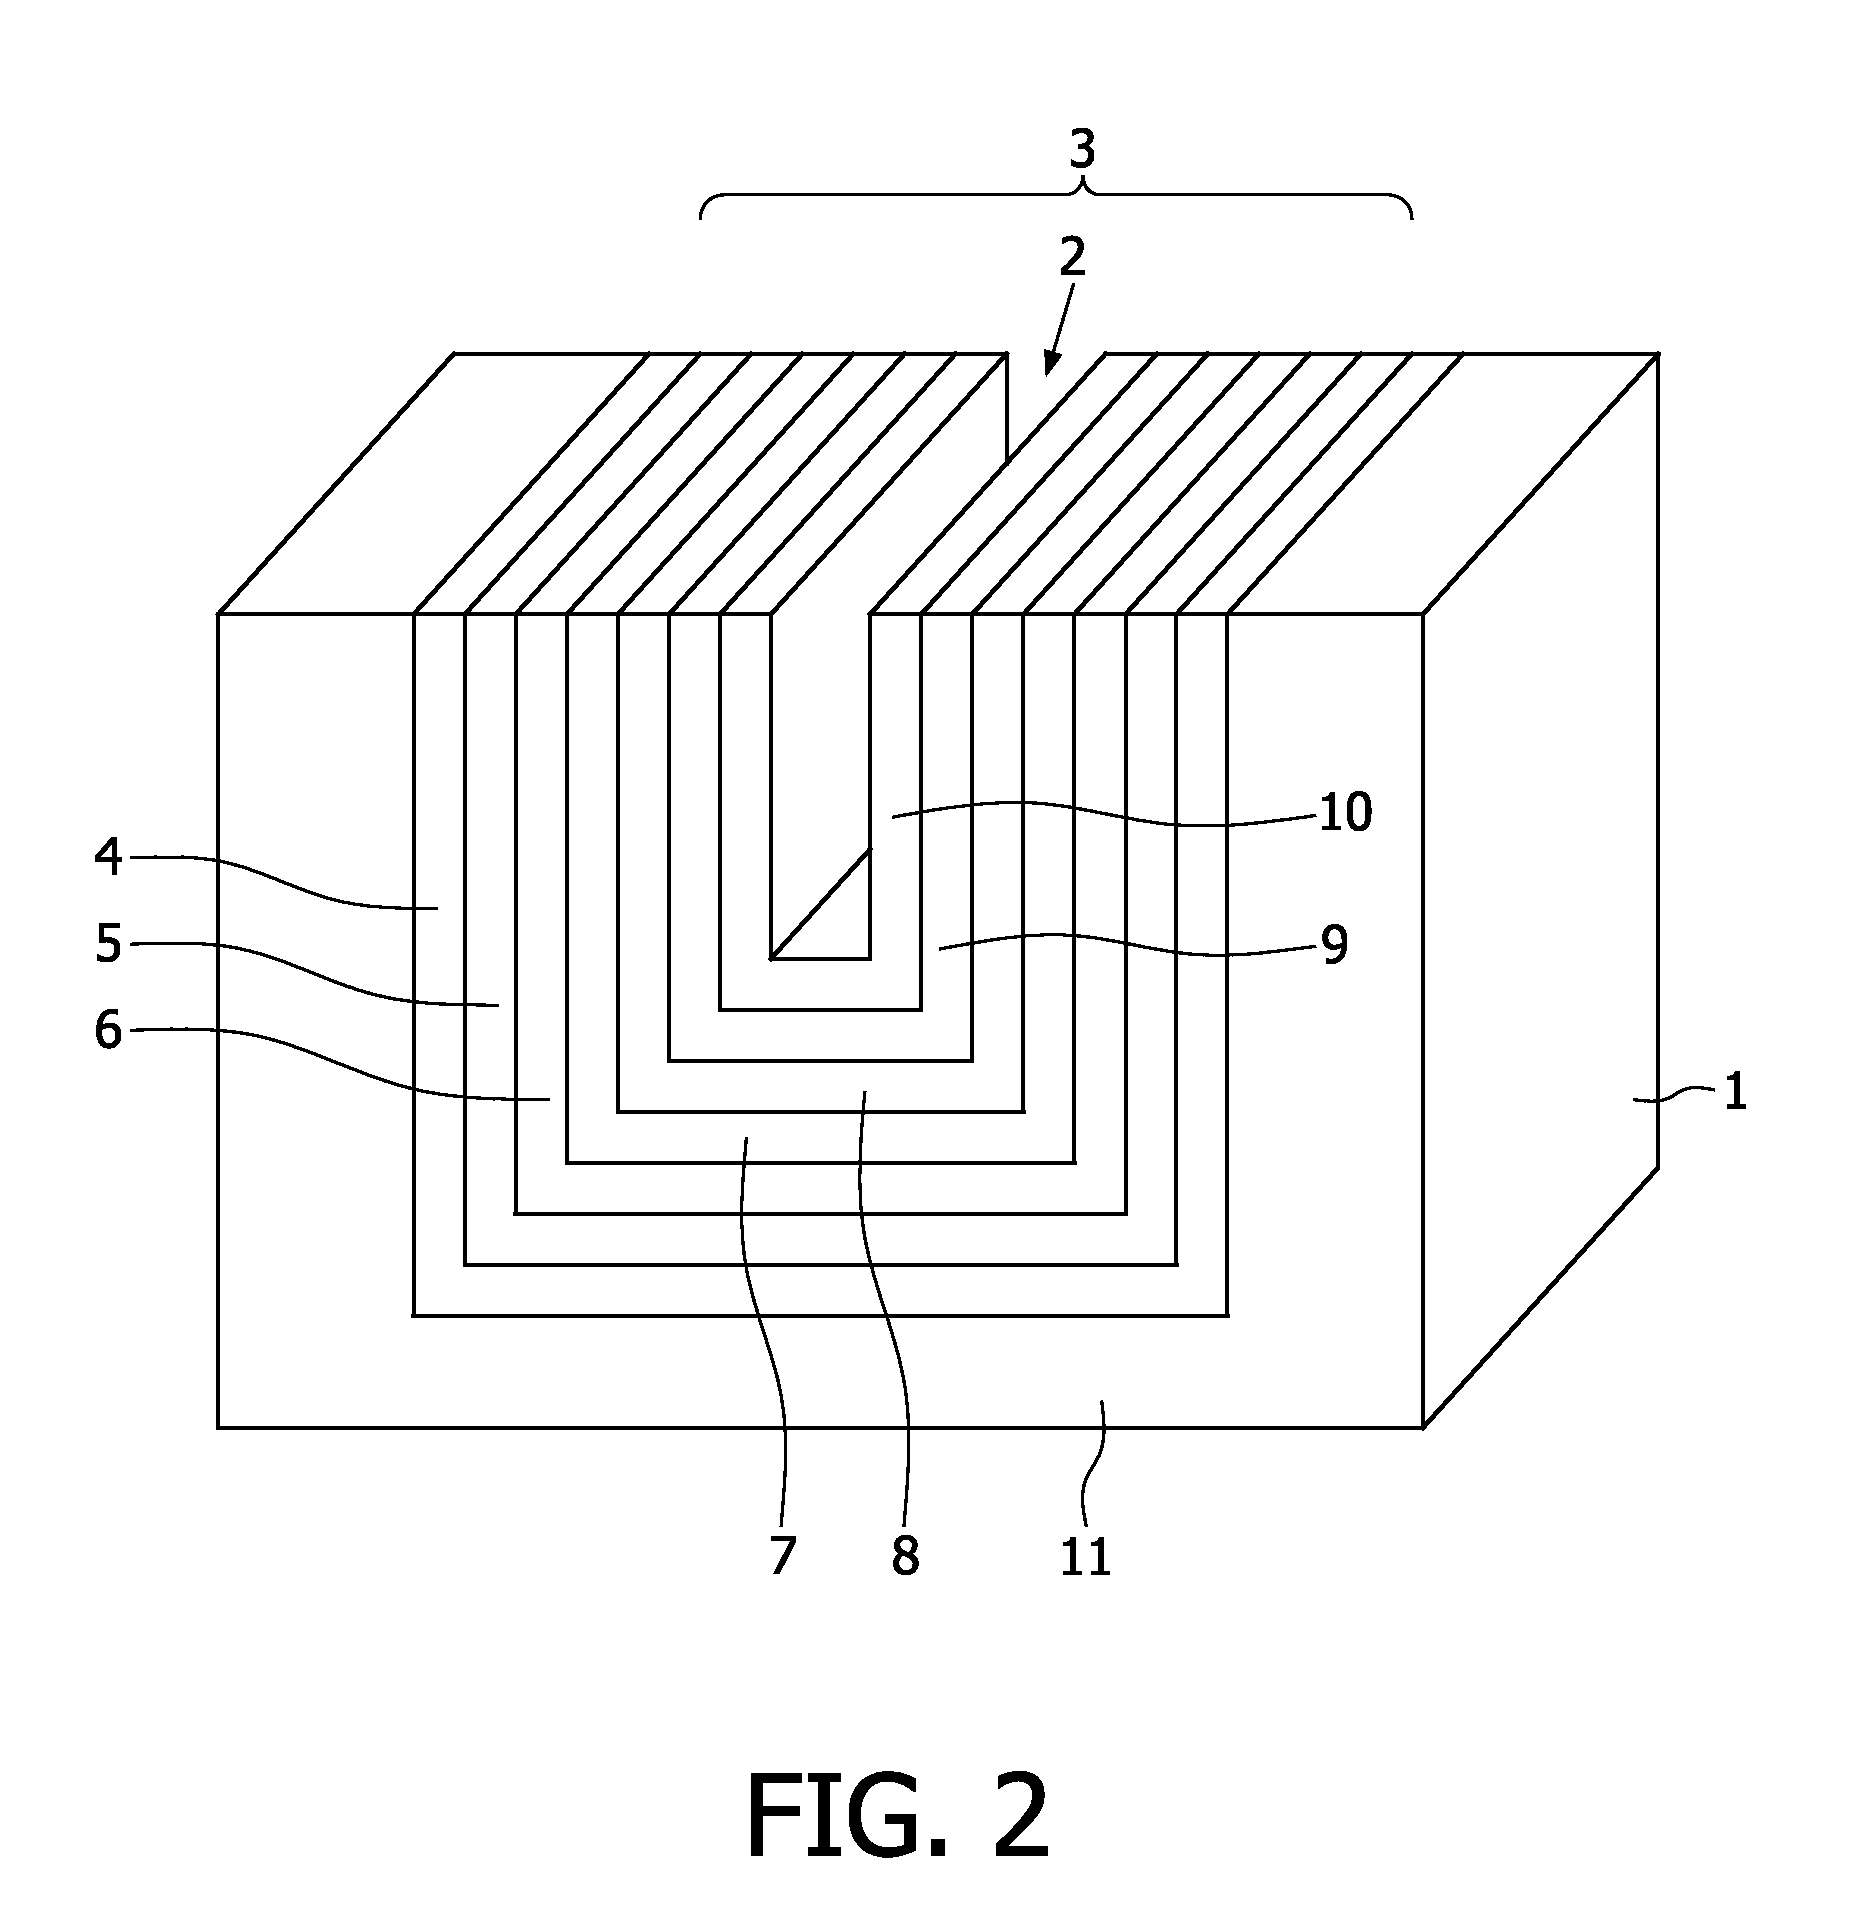 Solid-state structure comprising a battery and a variable capacitor having a capacitance which is controlled by the state-of-charge of the battery